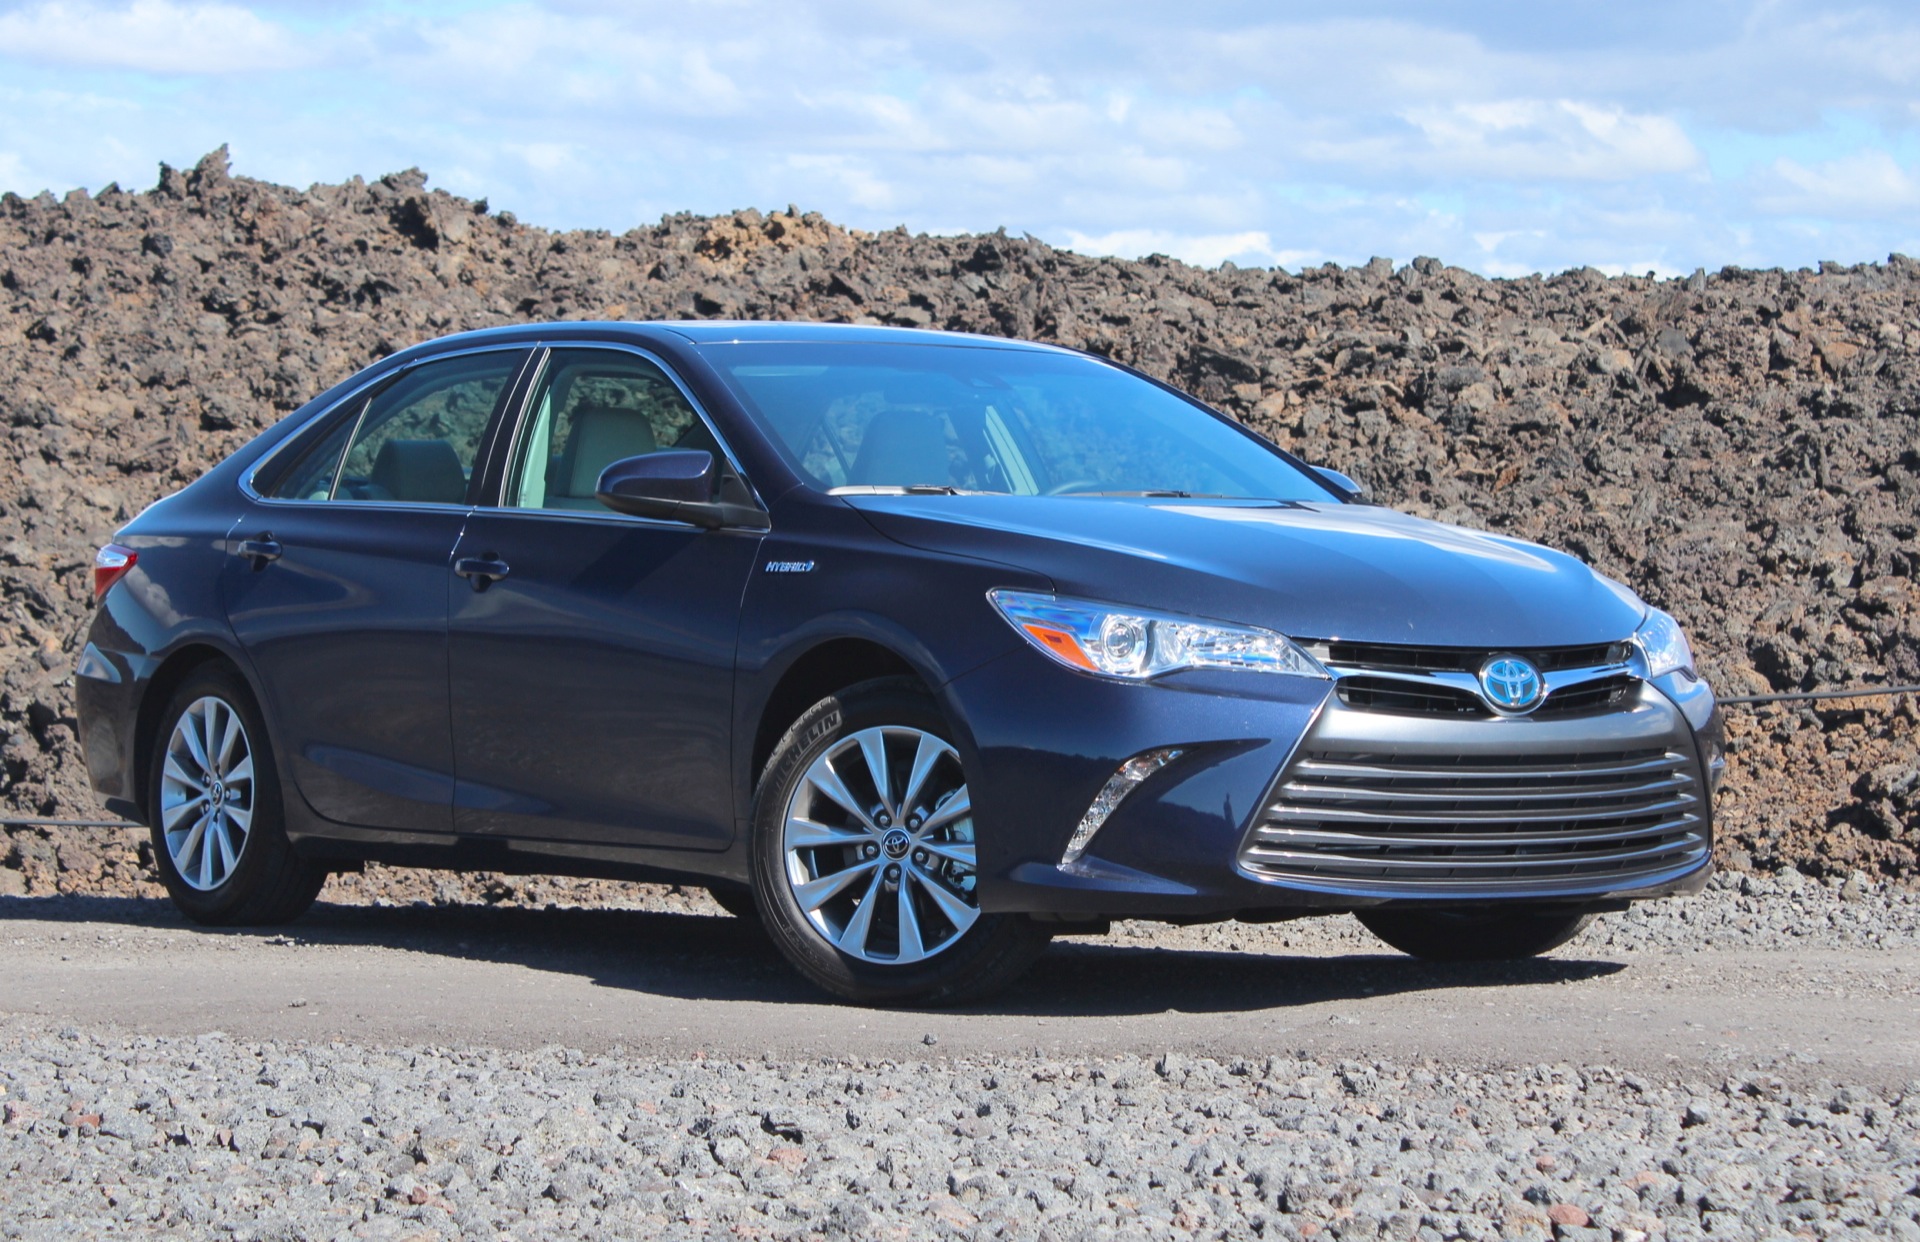 2015 Toyota Camry Hybrid best value of all says Consumer Reports  Torque  News